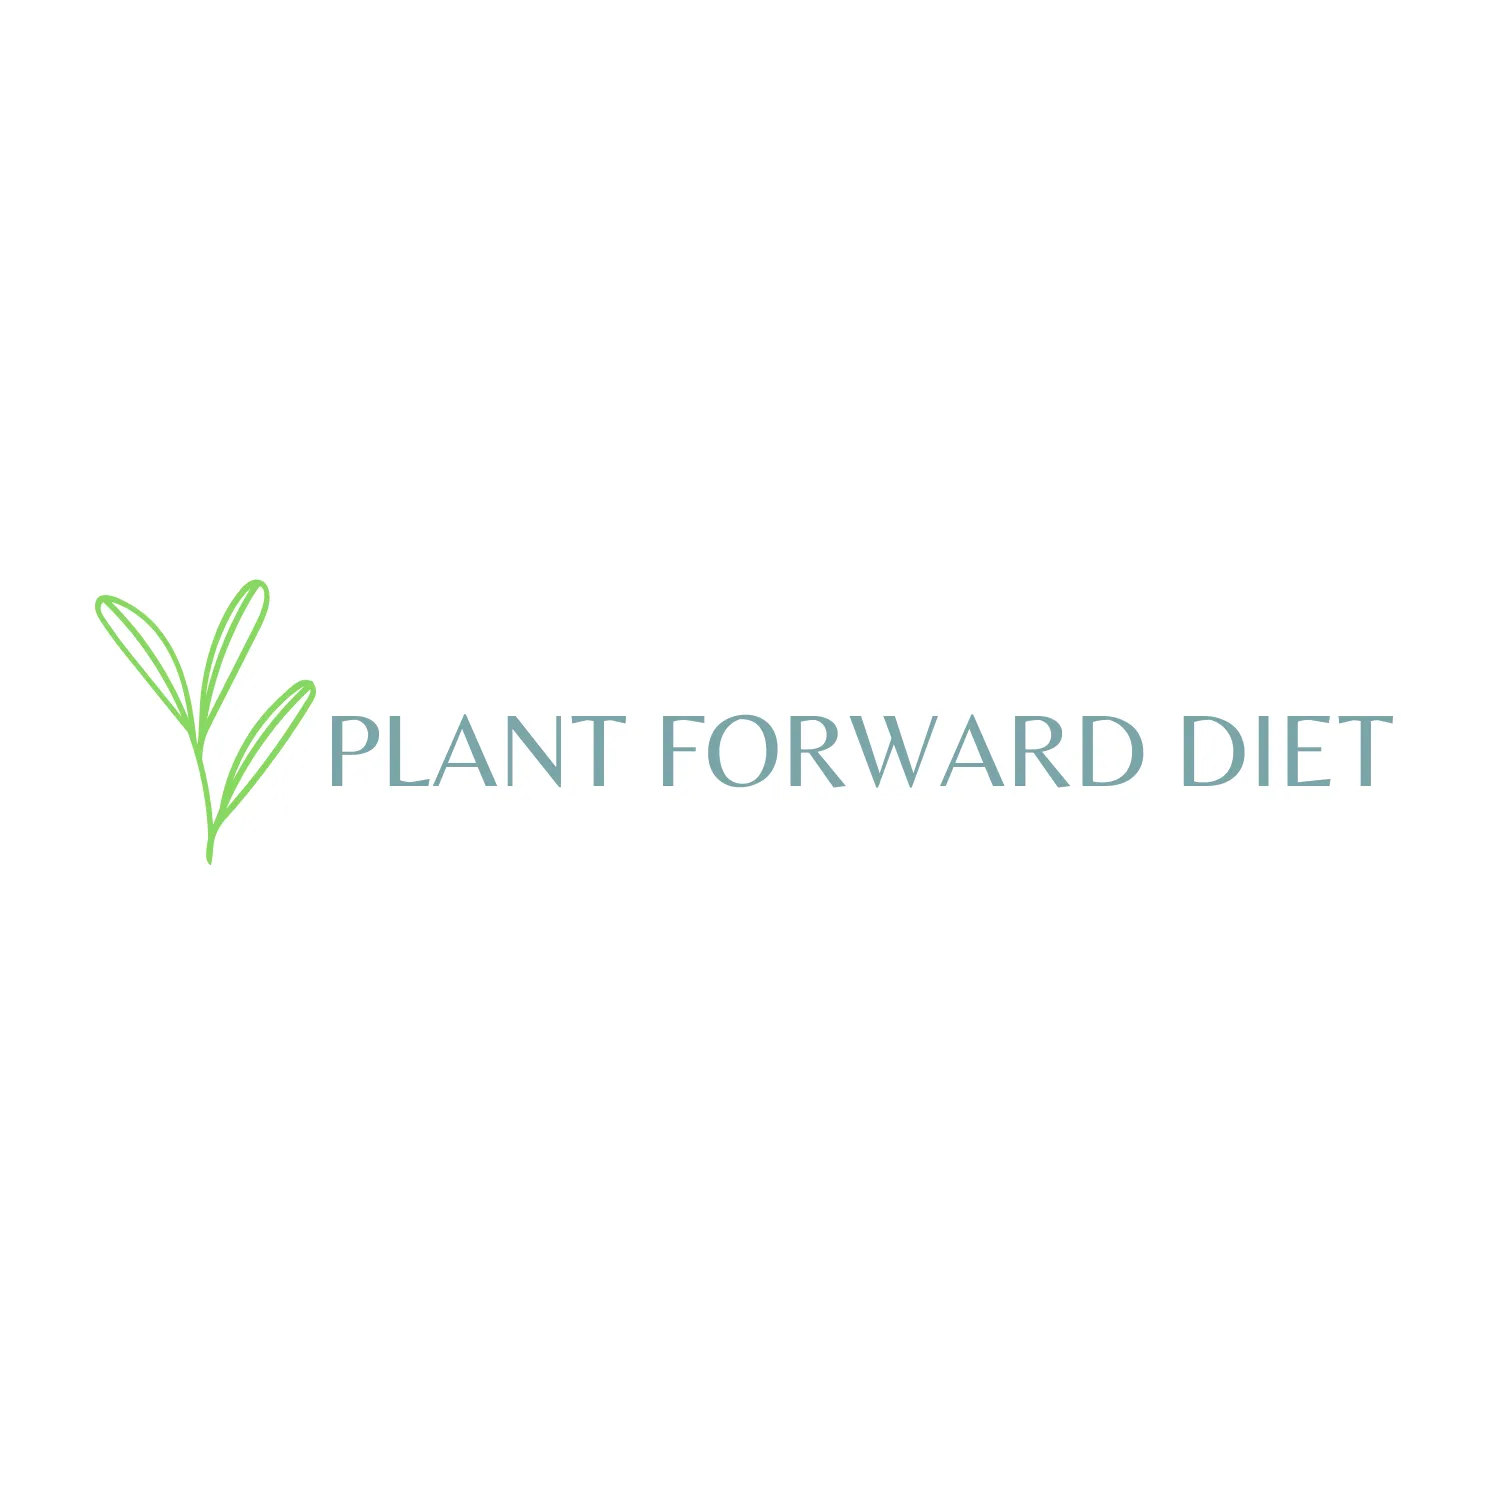 the plant forward diet